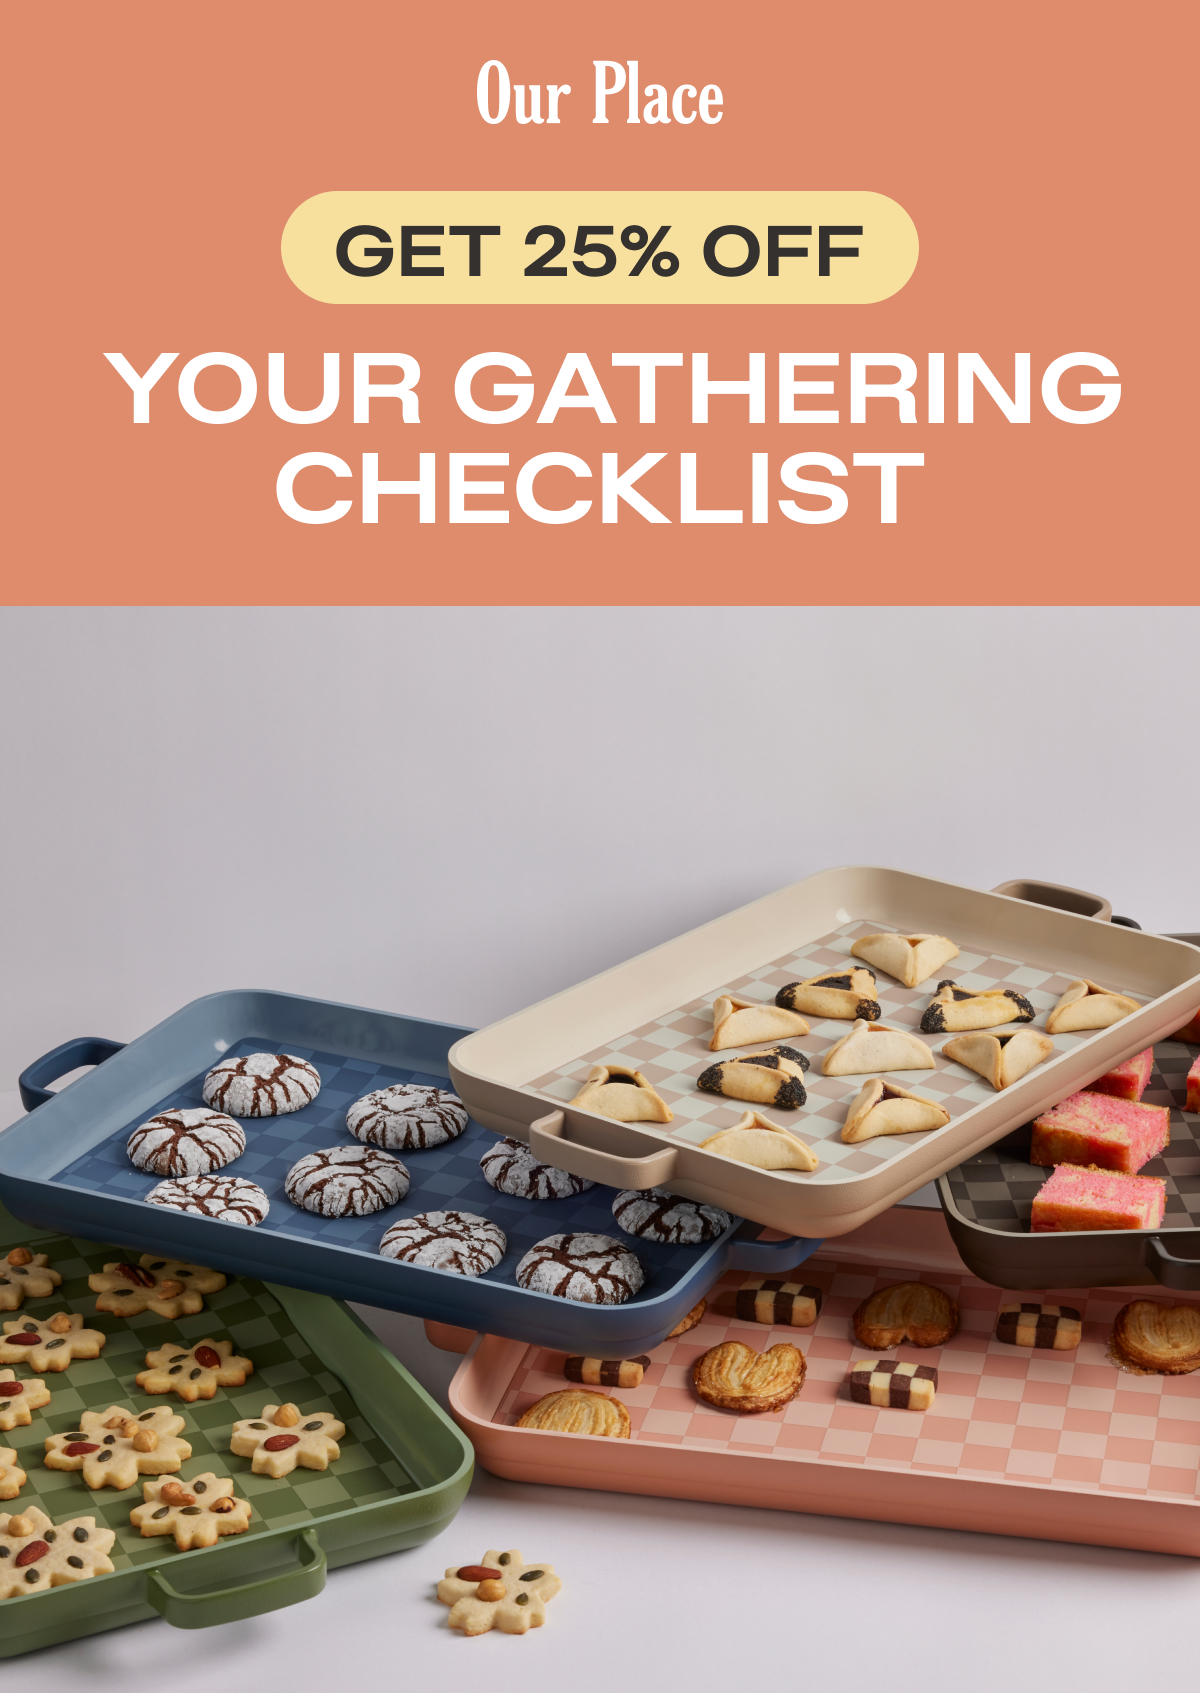 Our Place | Get 25% OFF Your Gathering Checklist